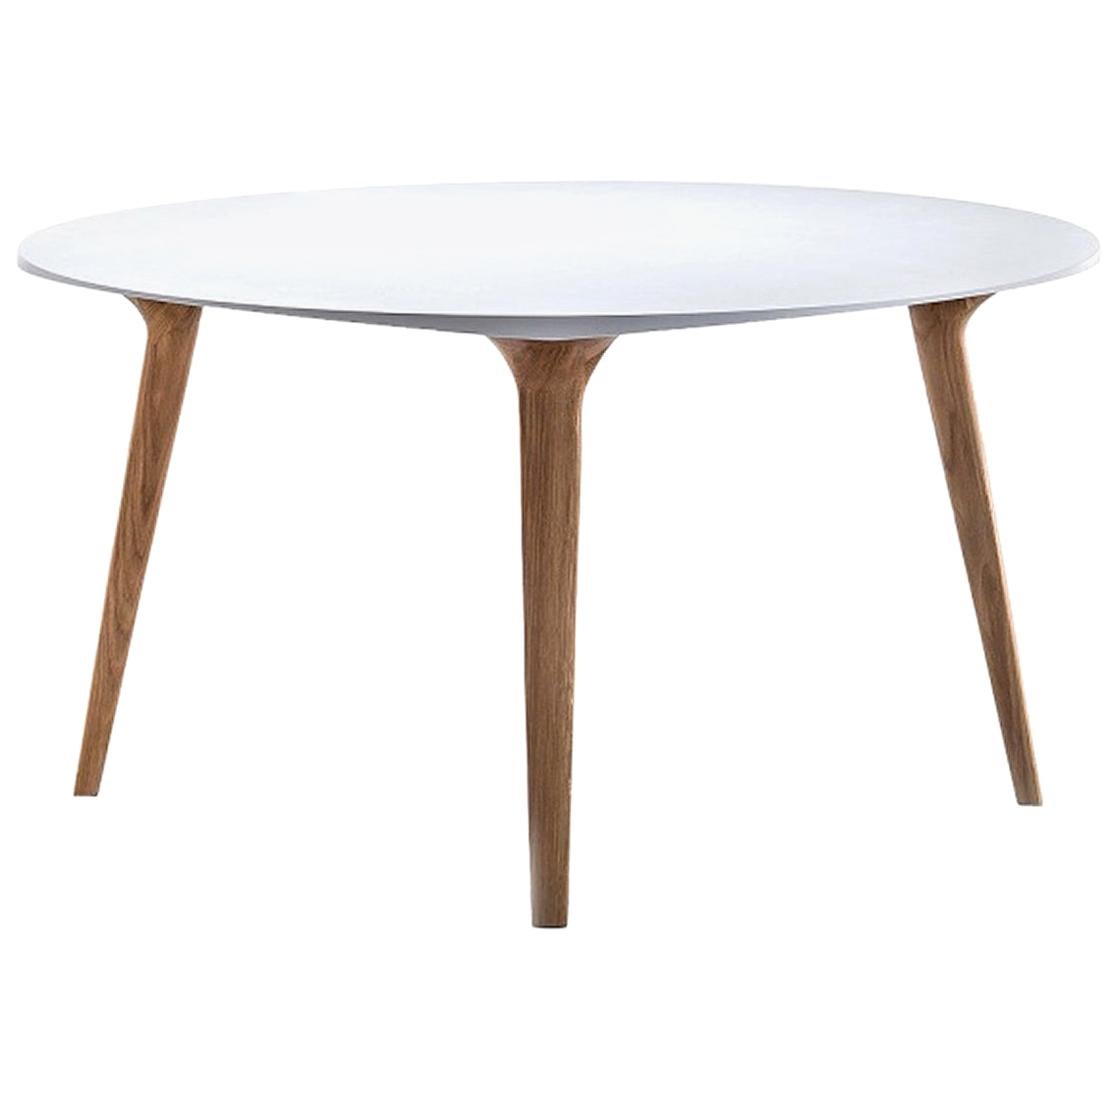 Ademar Walnut / Marble Dining Table, designed by Giulio Lacchetti, Made in Italy